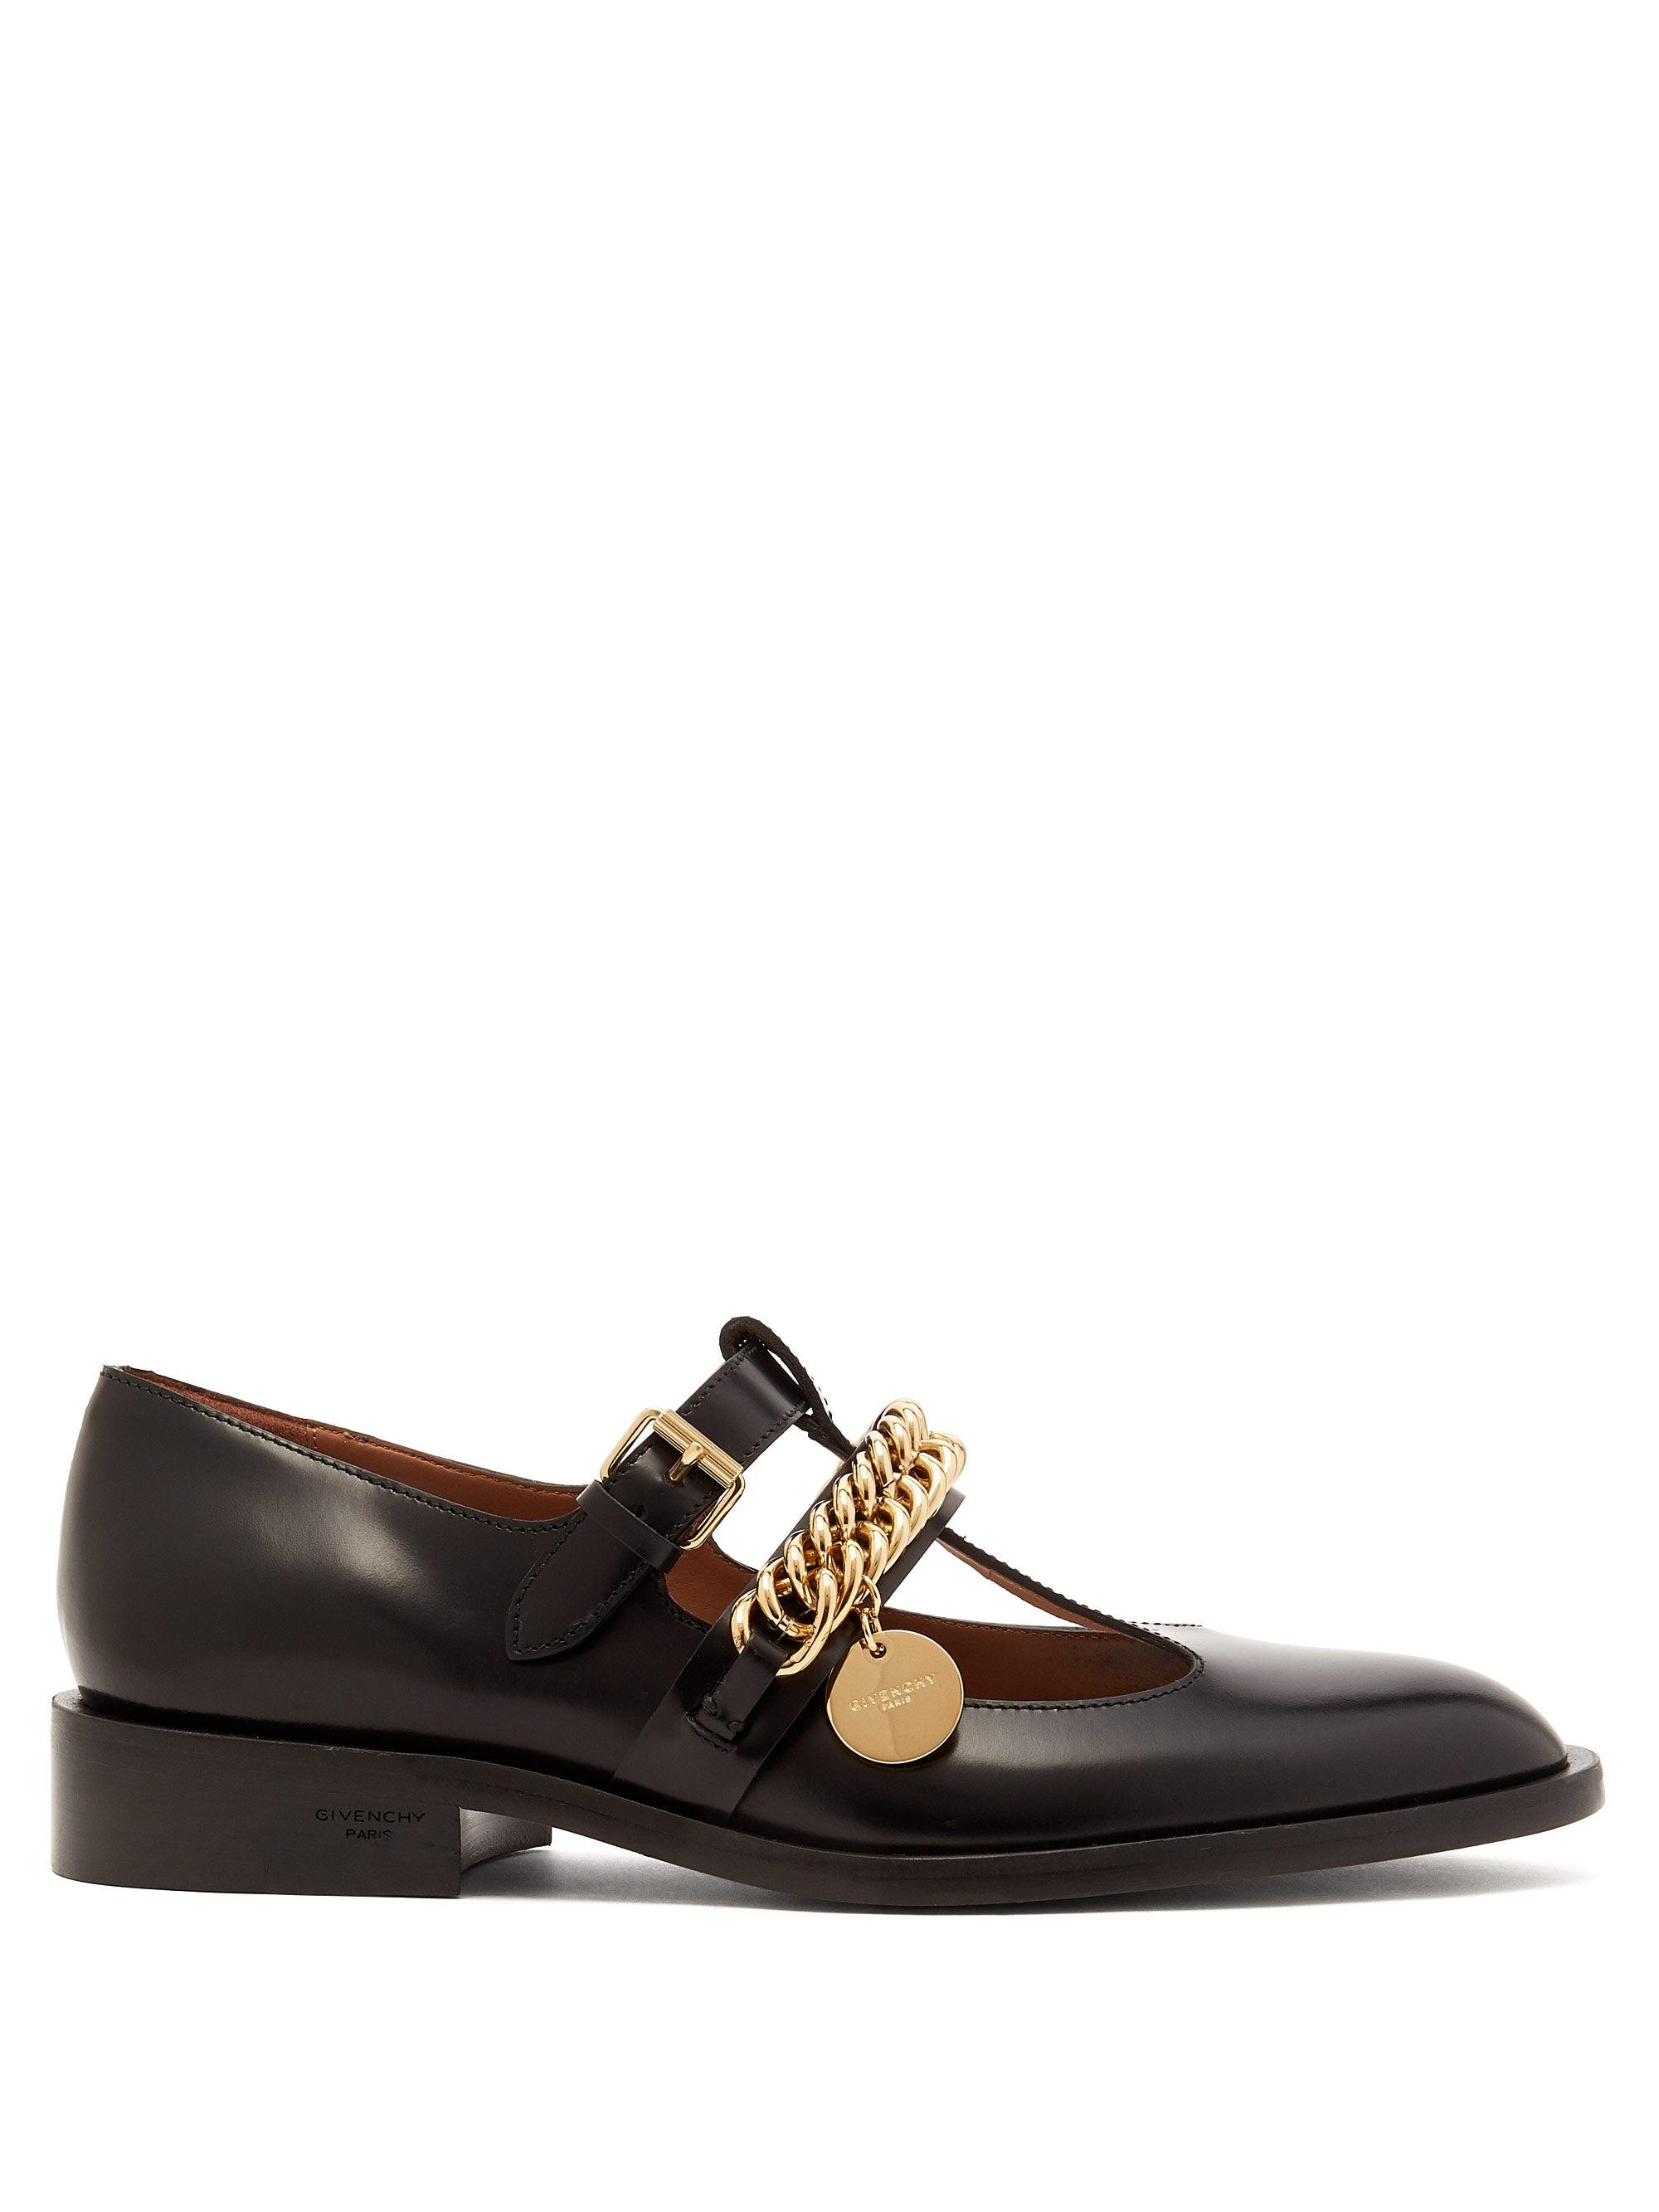 Givenchy Chain-embellished Leather Mary-jane Flats in Black | Lyst